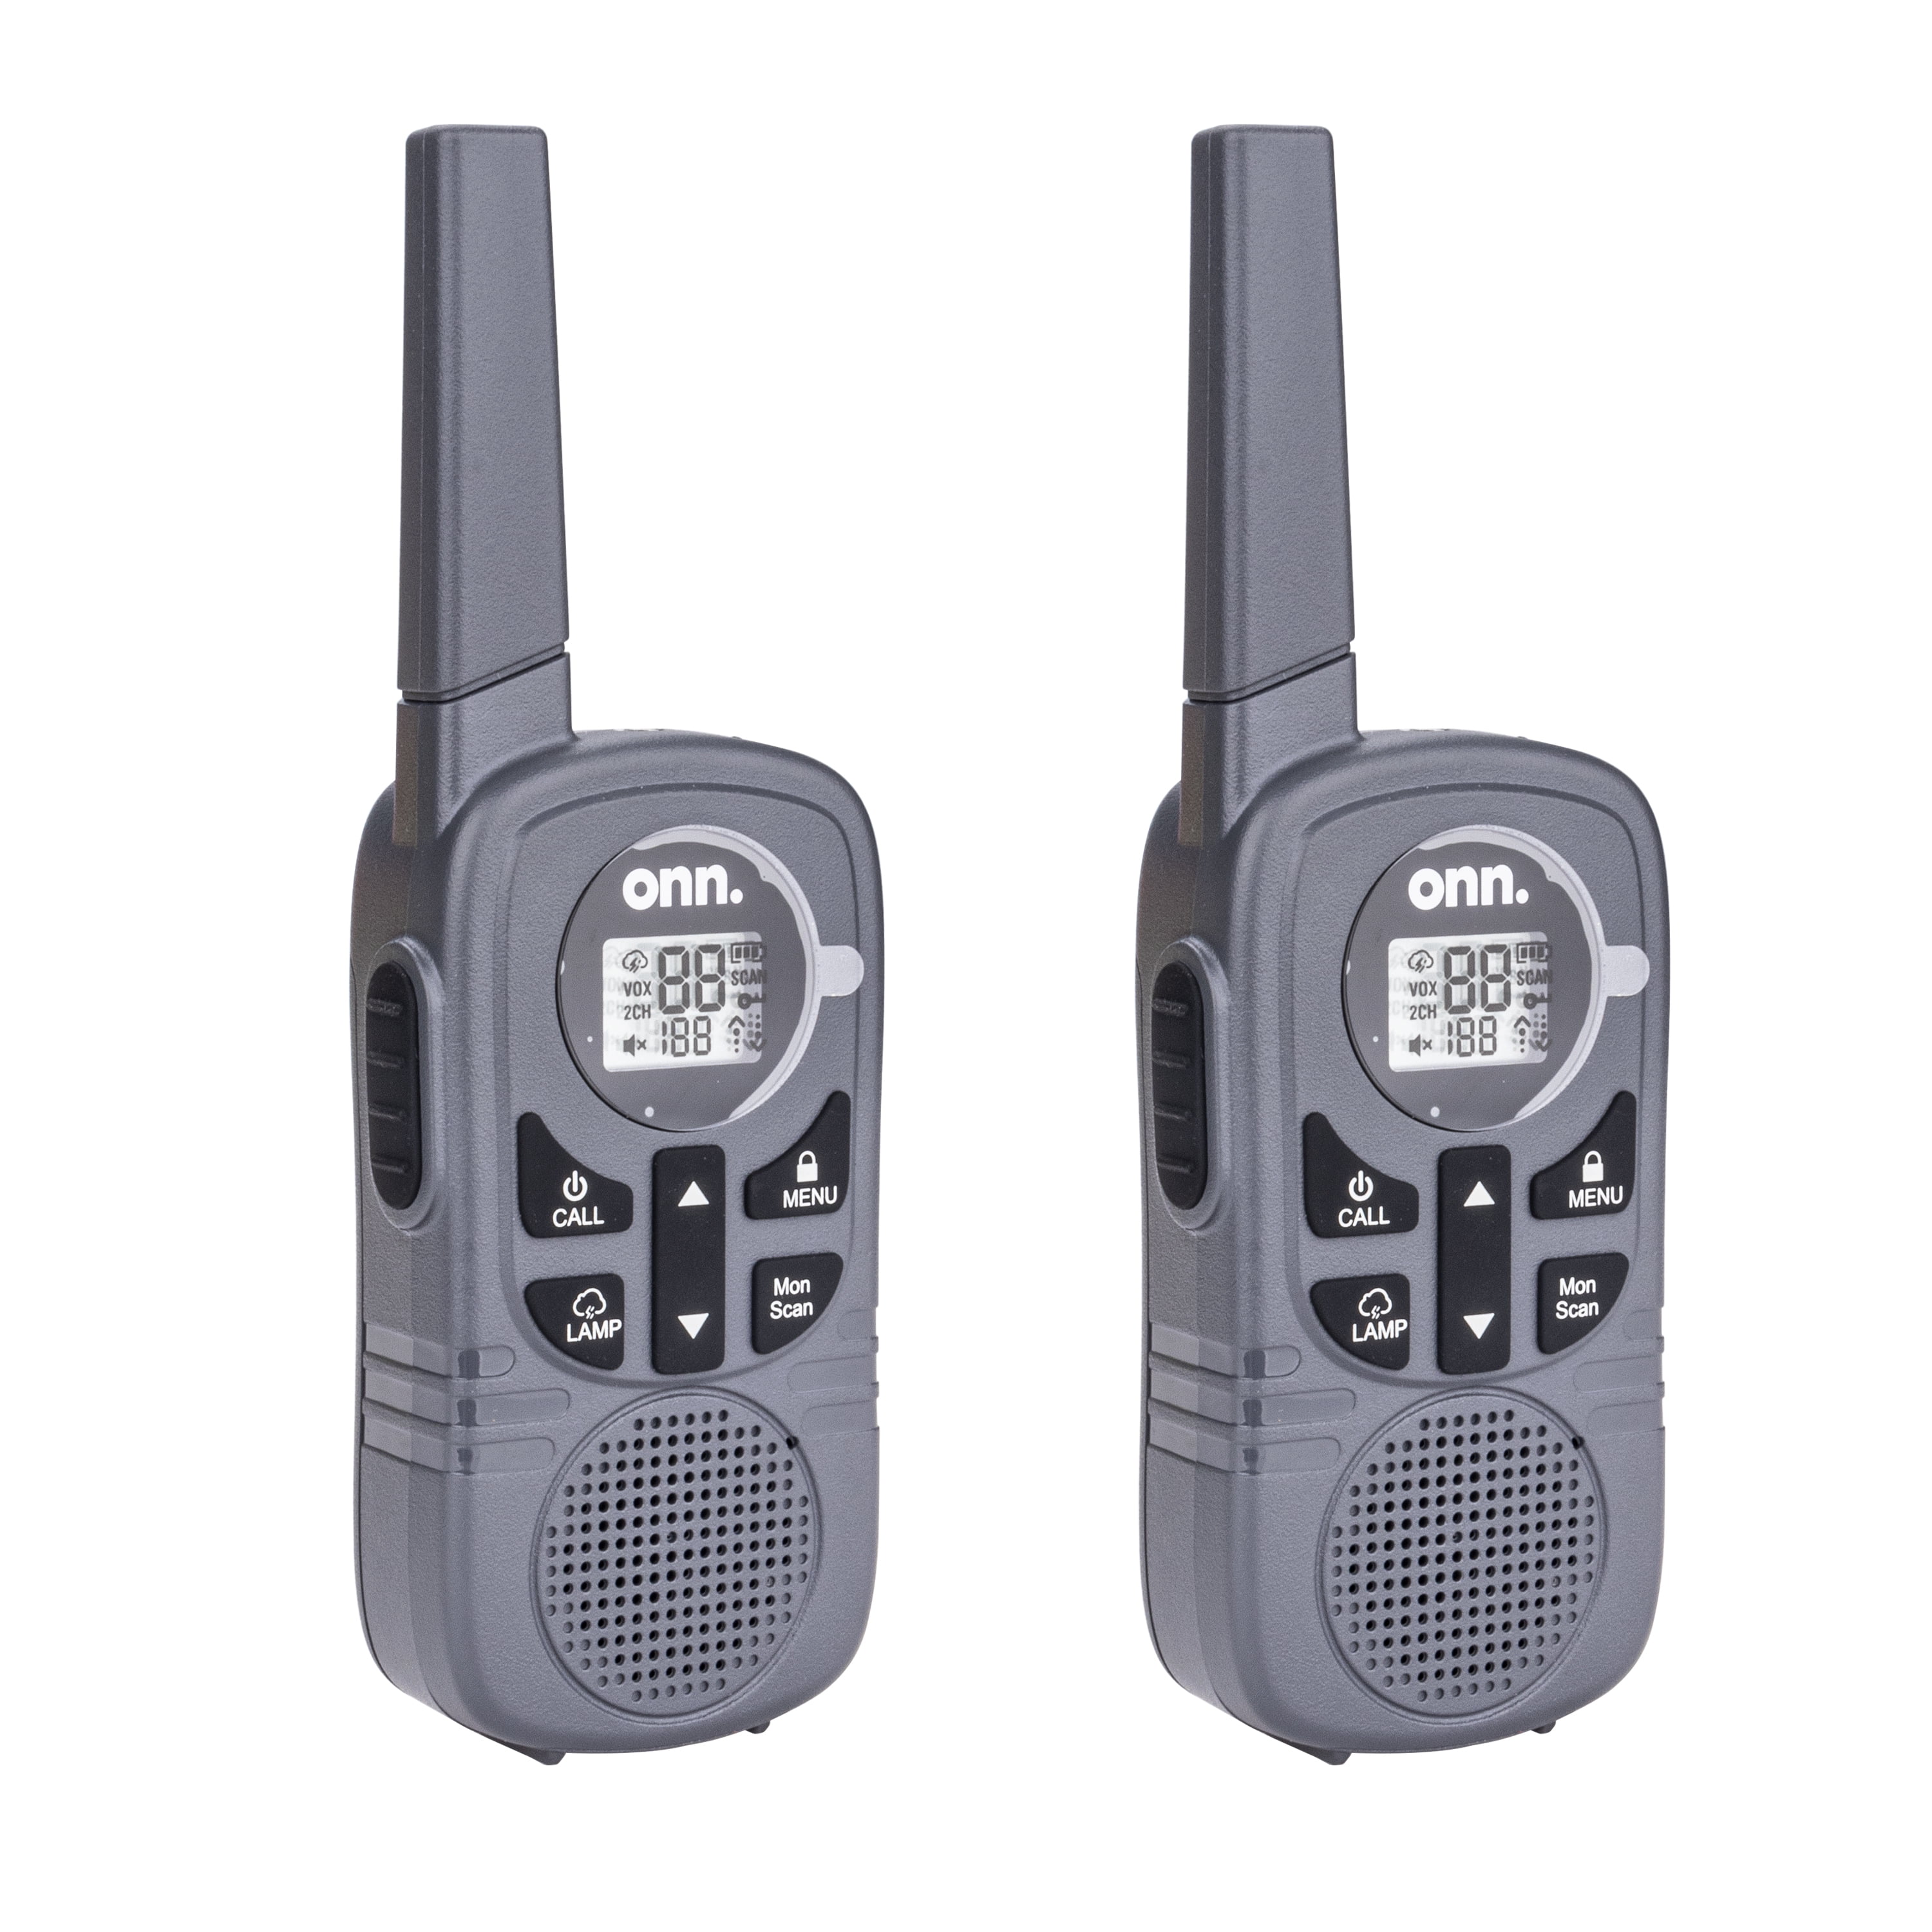 Onn. 16 Miles Walkie Talkies 2pk with Two Way Radios, LED Light,  Rechargeable